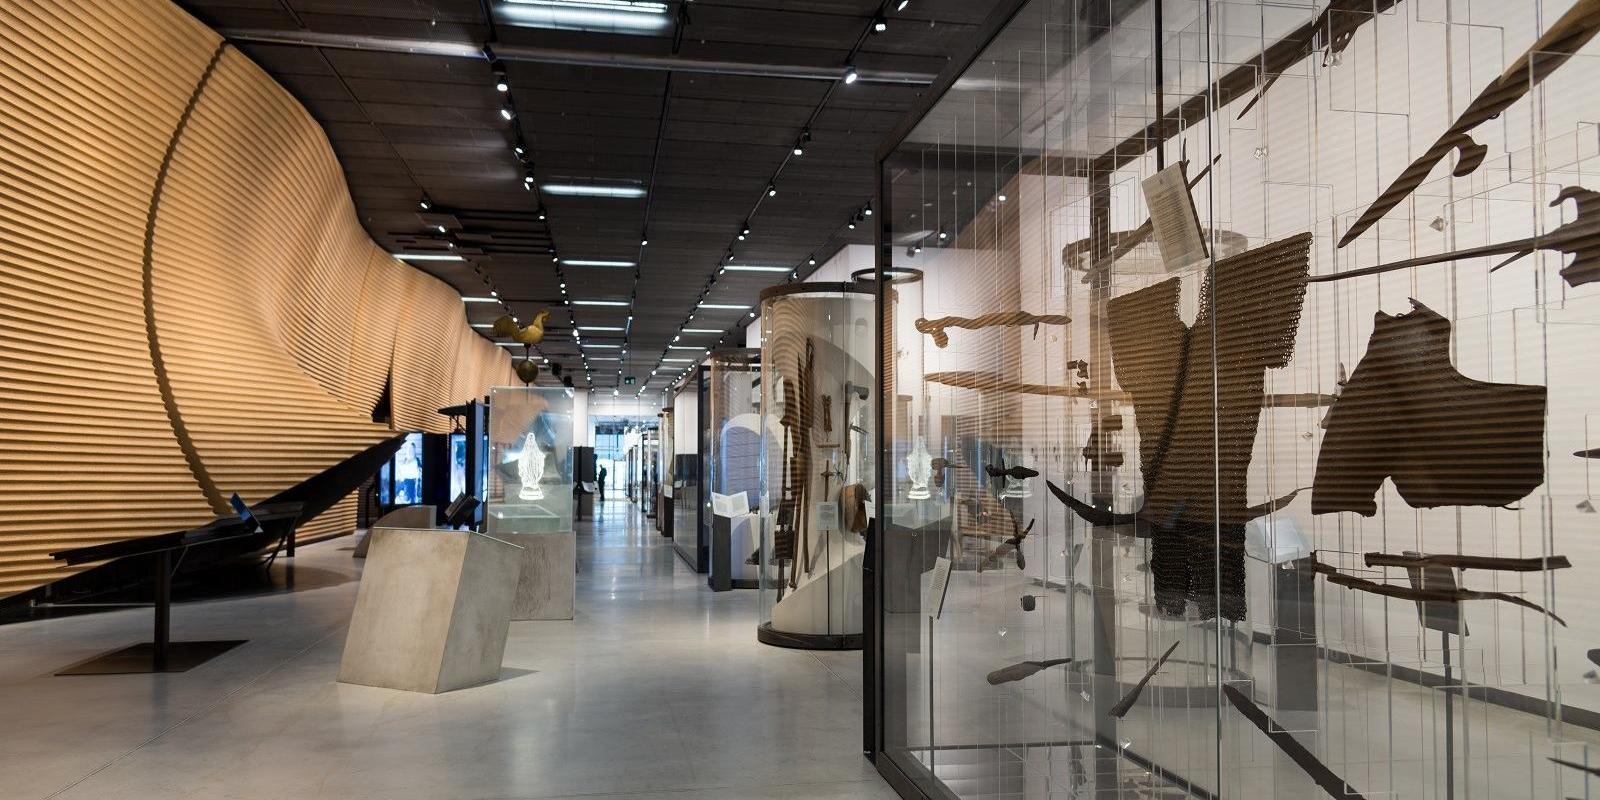 The Estonian National Museum’s permanent exhibition ‘Encounters’, armor and weapons